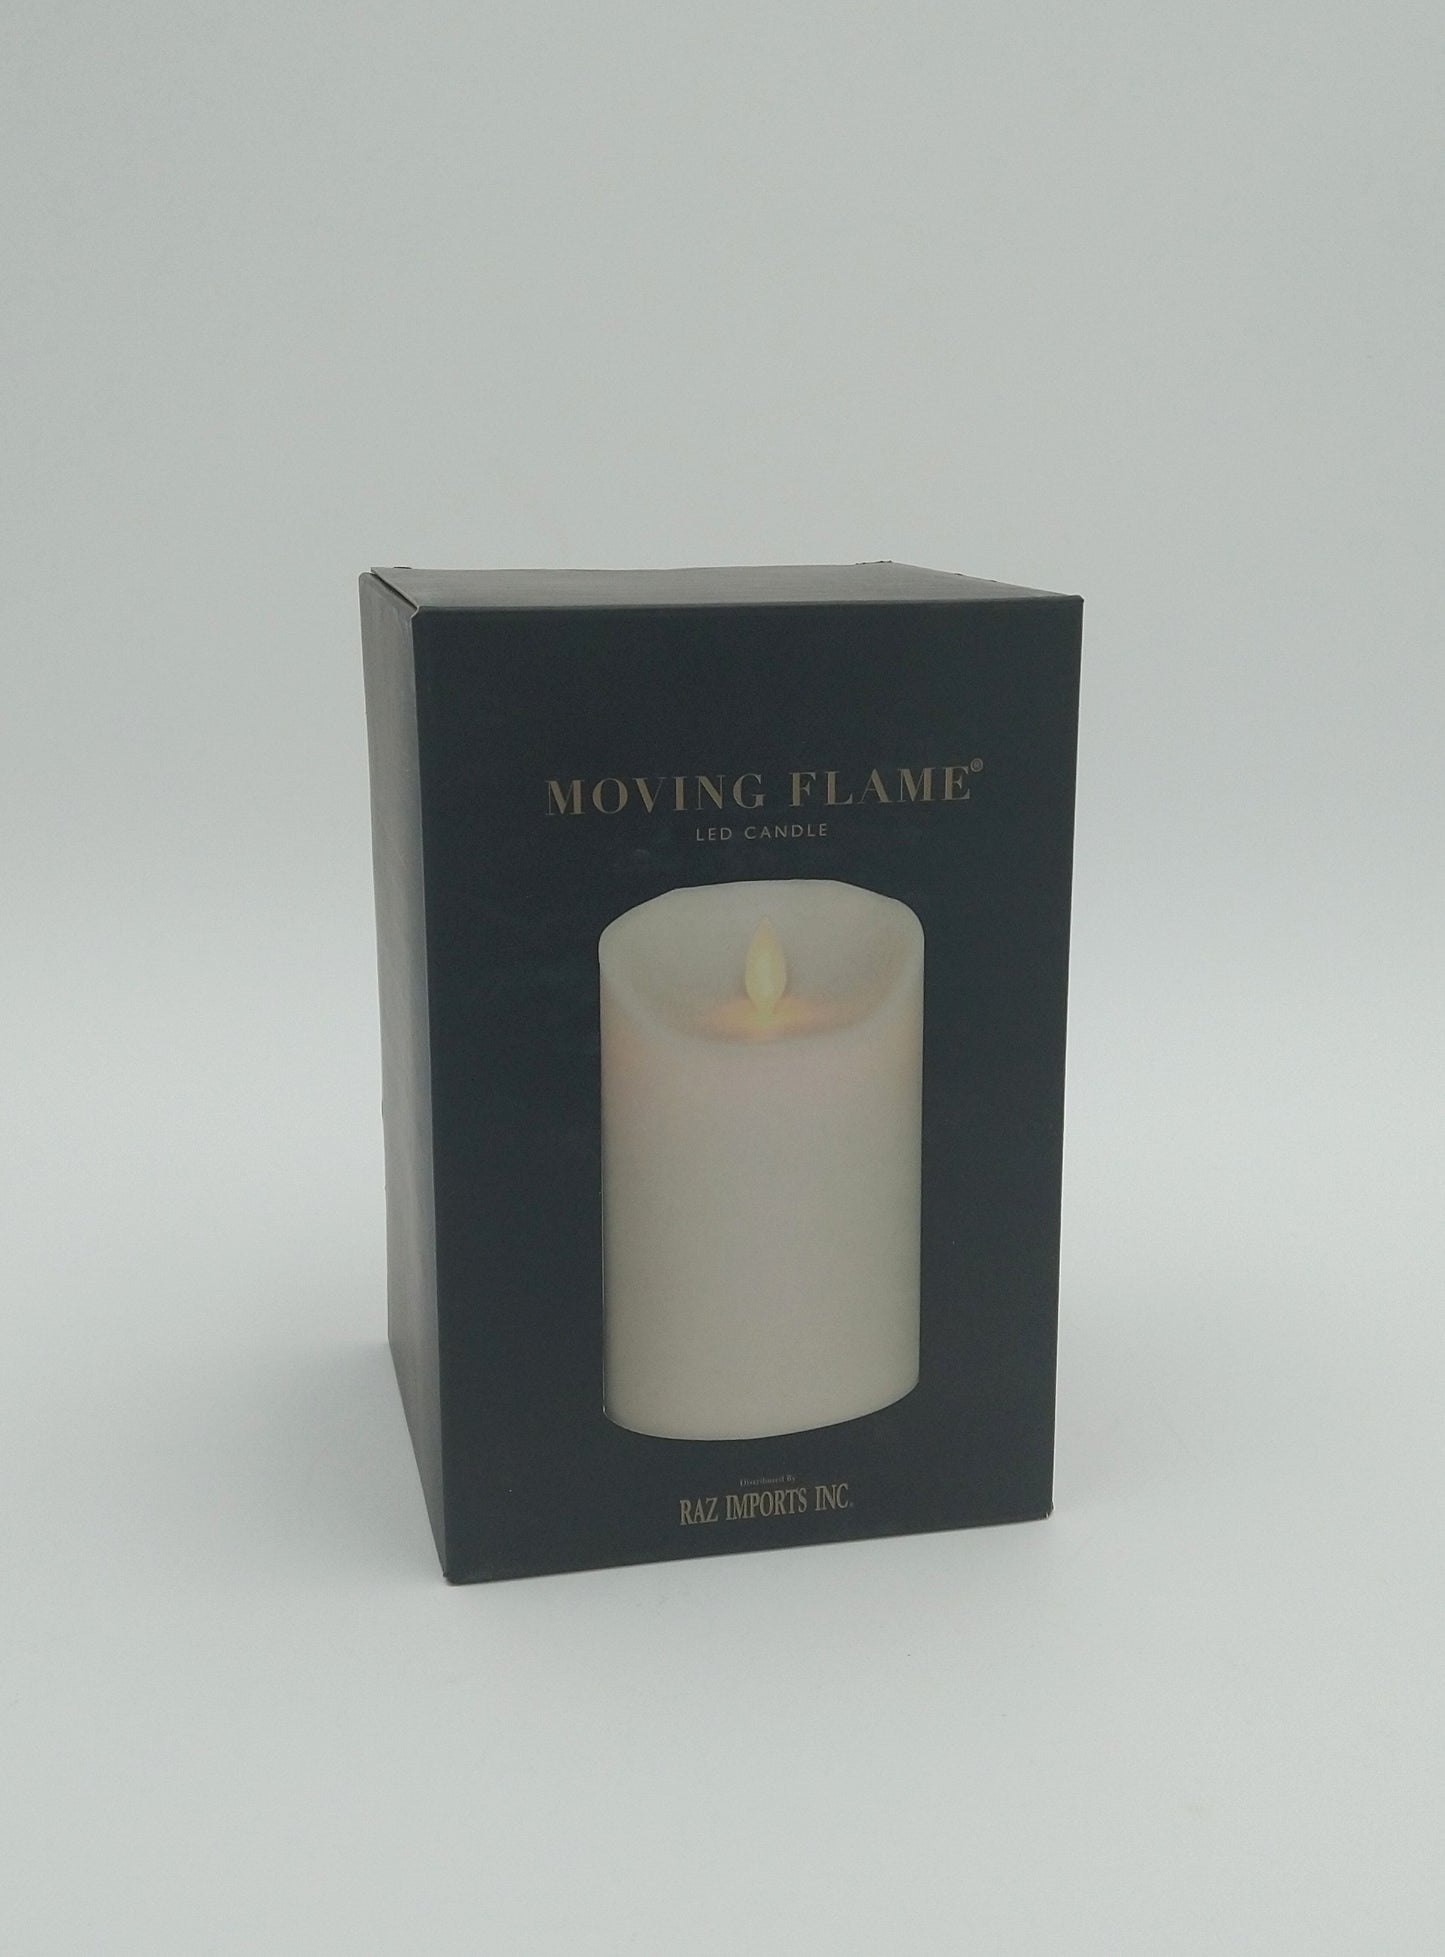 Flameless Pillar Candle 3.5"X 5" Indoor/Outdoor Battery Operated